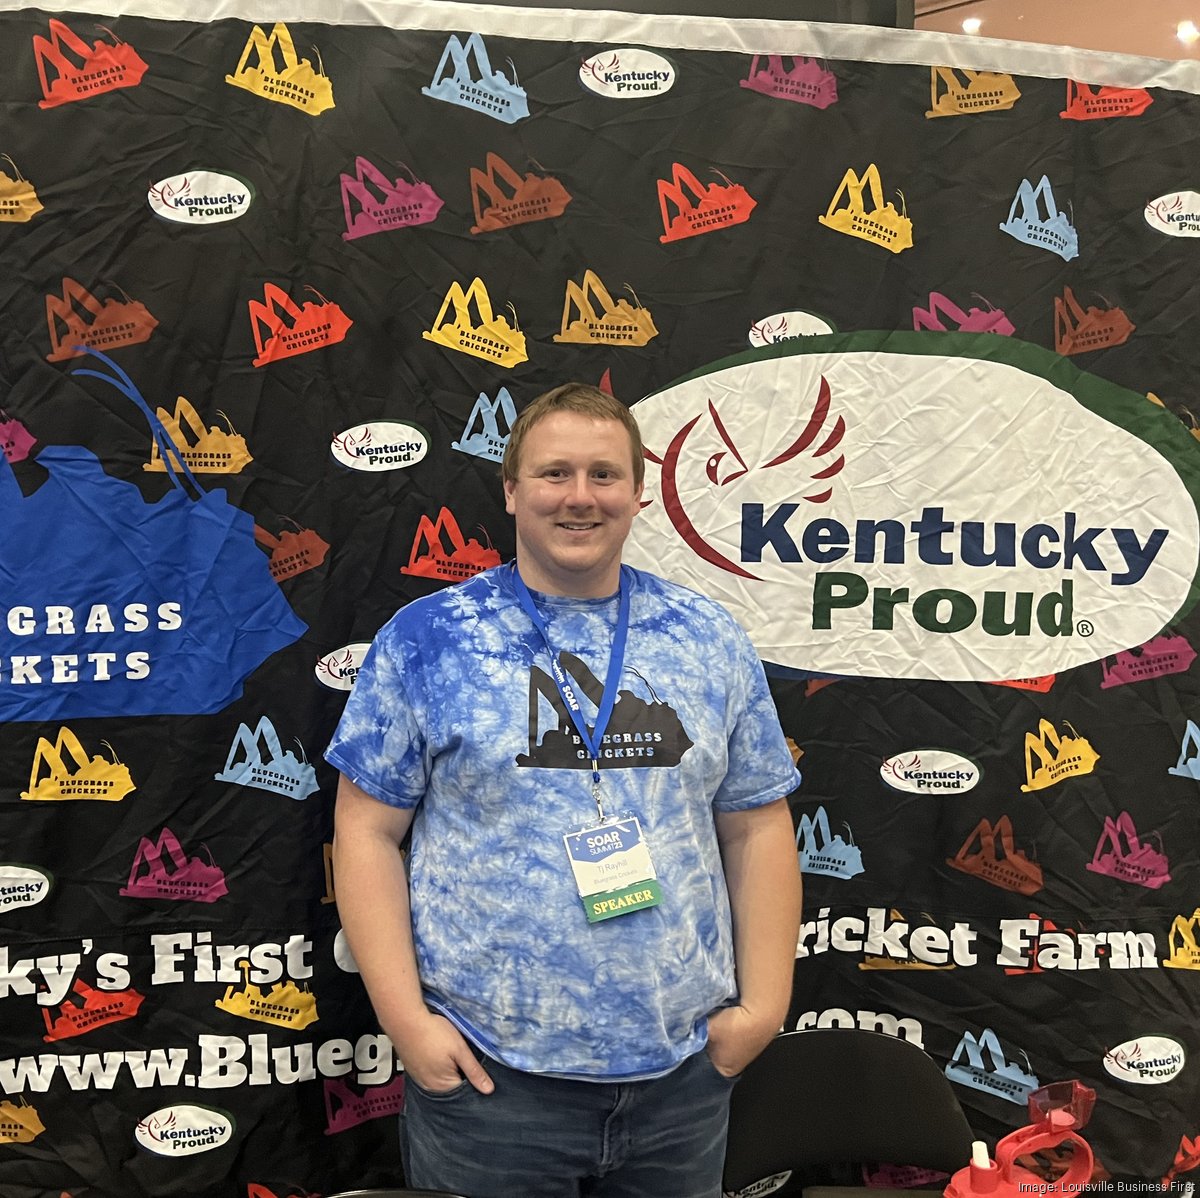 KY Inno - Small but scrumptious? Eastern Kentucky startup looks to getting  into edible insect space